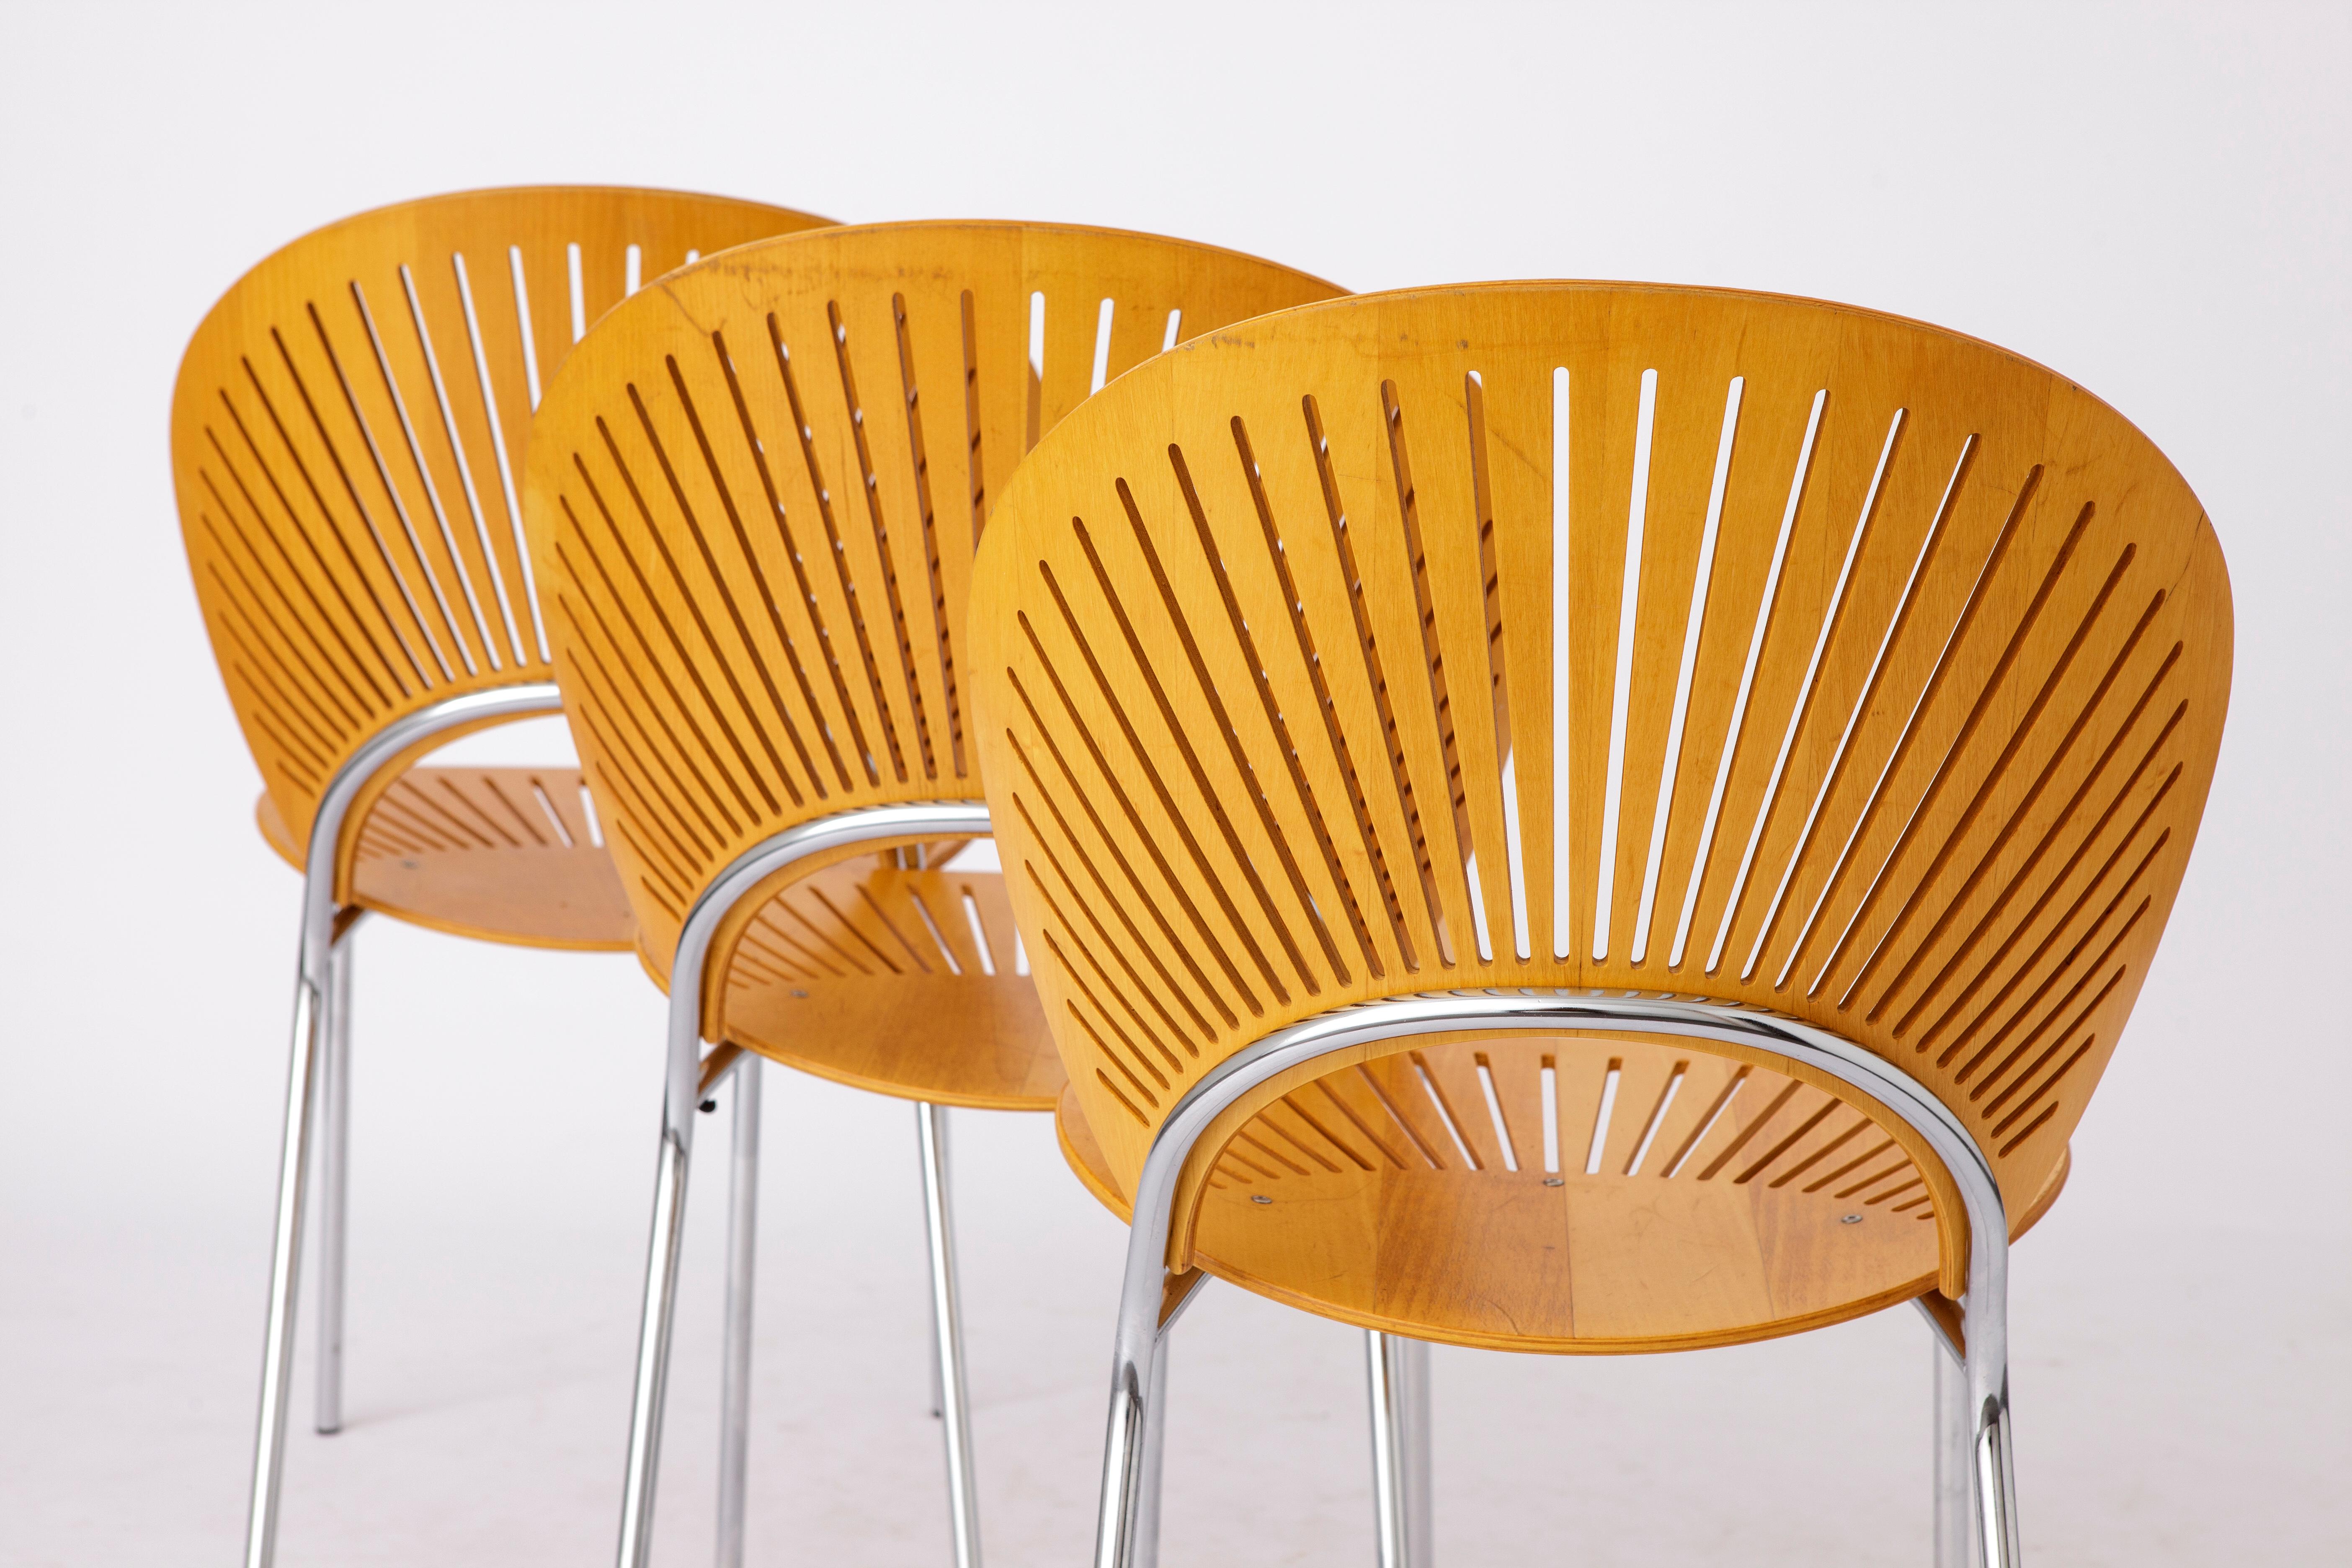 Polished 3 Nanna Ditzel Dining Chairs, model Trinidad for Fredericia, Denmark 1990s Vinta For Sale